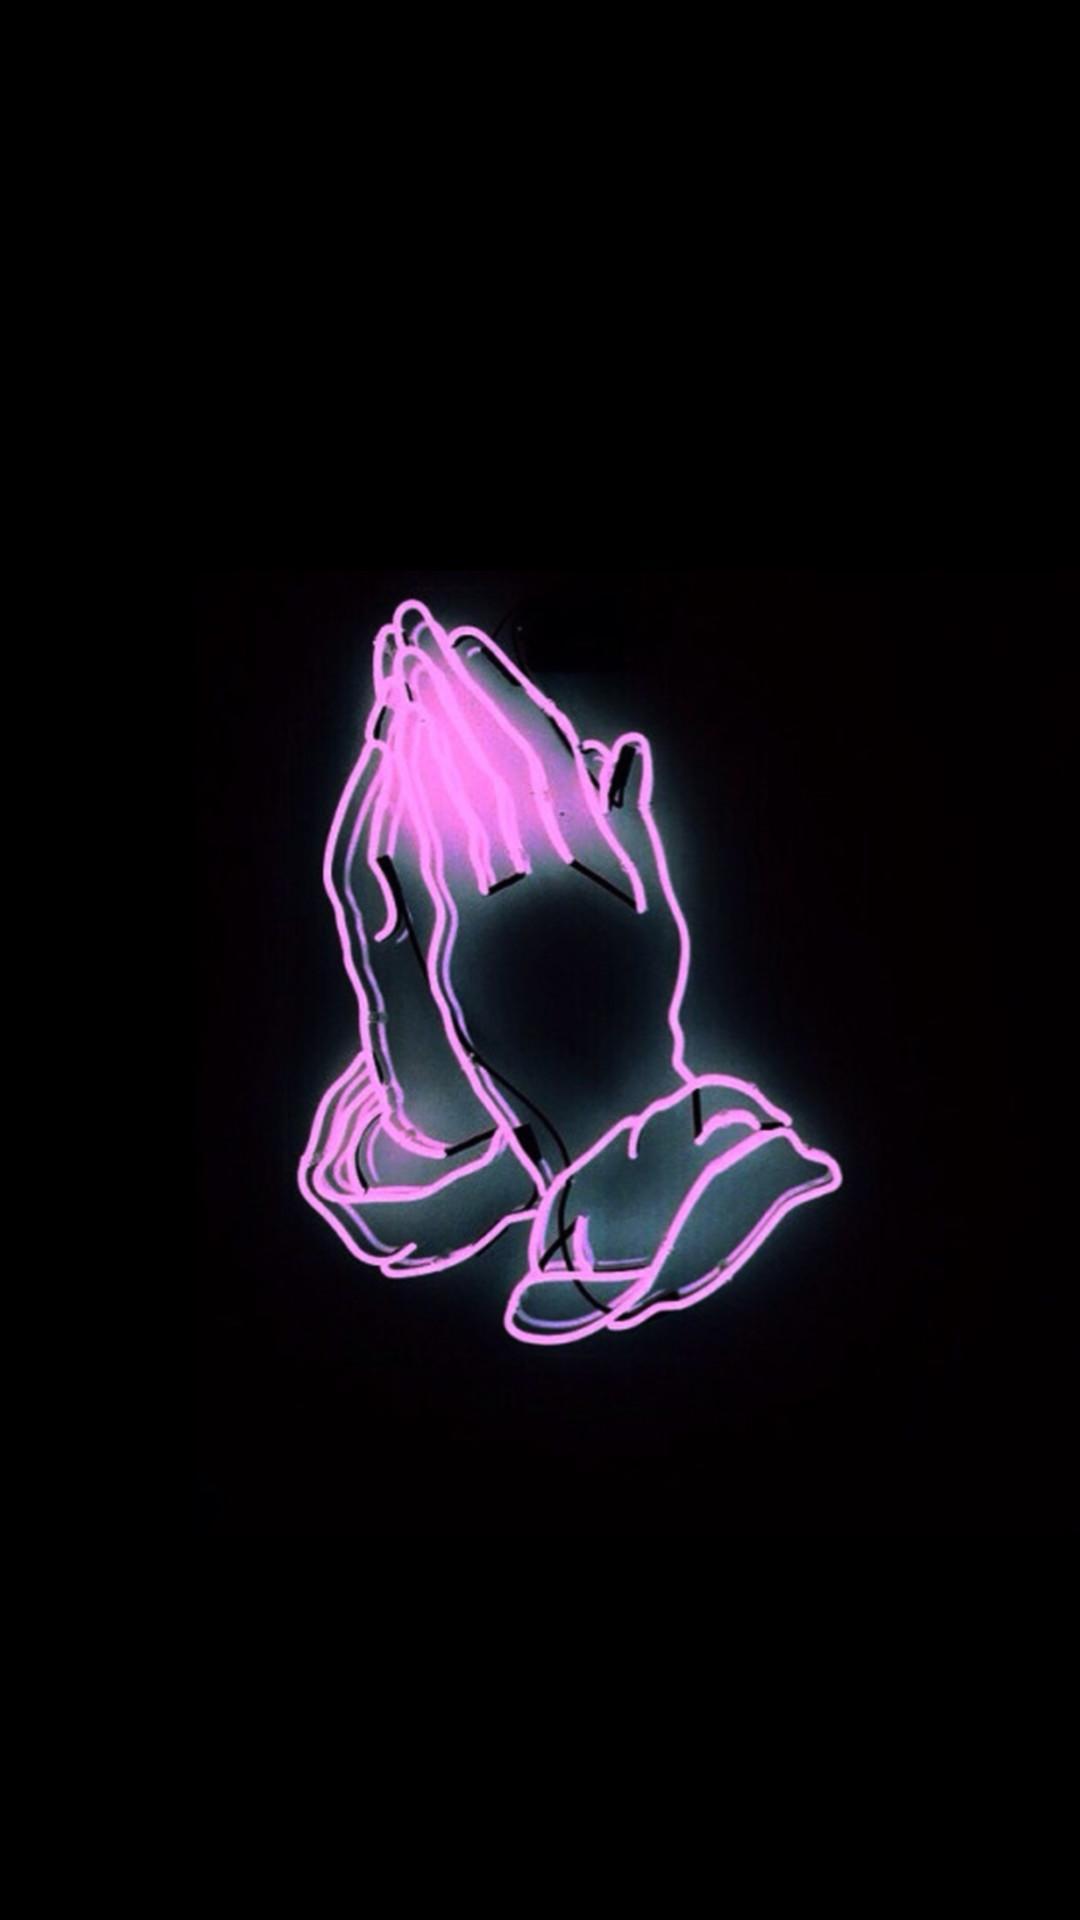 1080 x 1920 · jpeg - Good Quality Aesthetic Drake Wallpapers - Wallpaper Cave